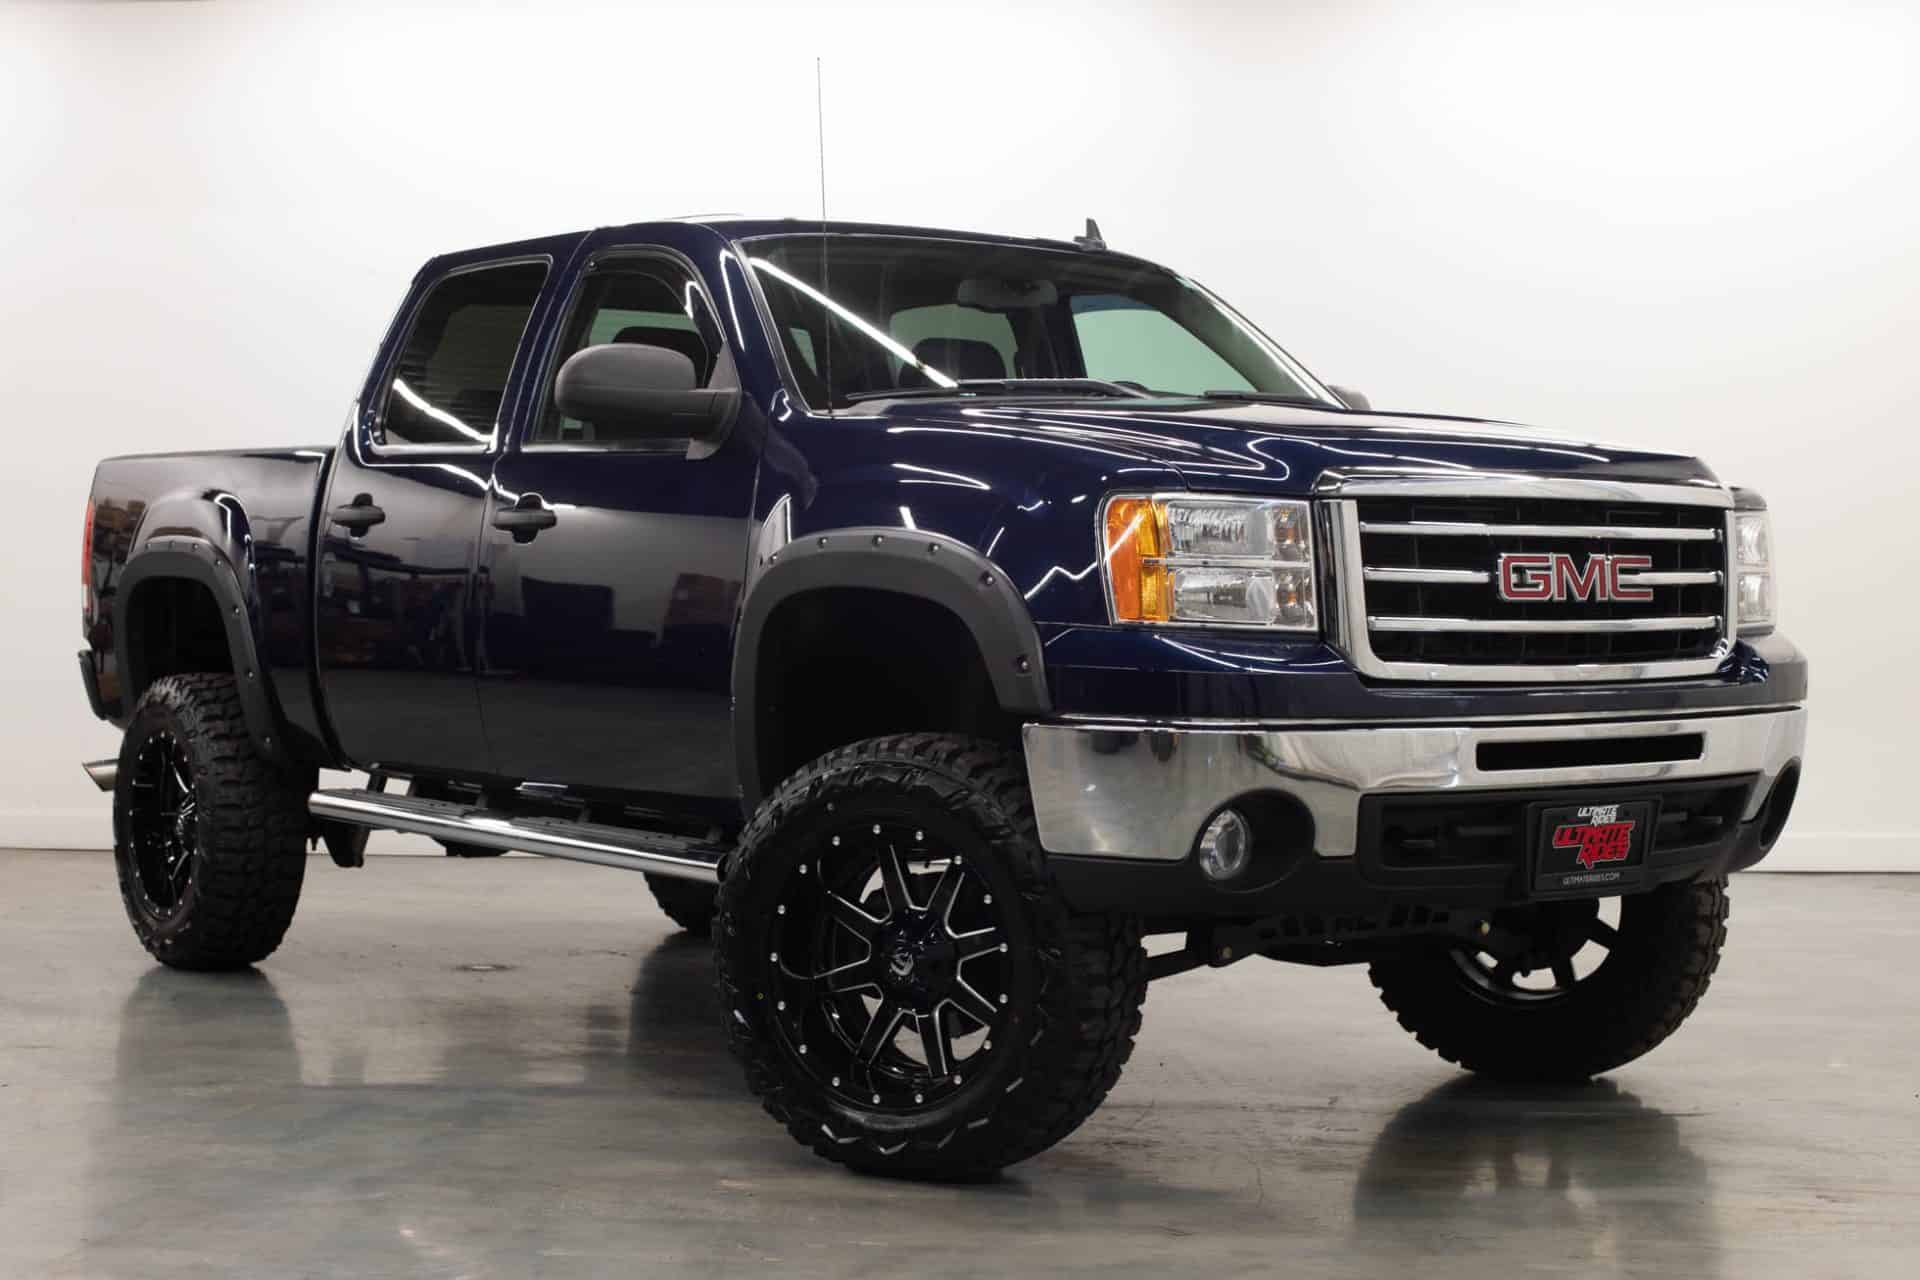 Used GMC Lifted Trucks for Sale